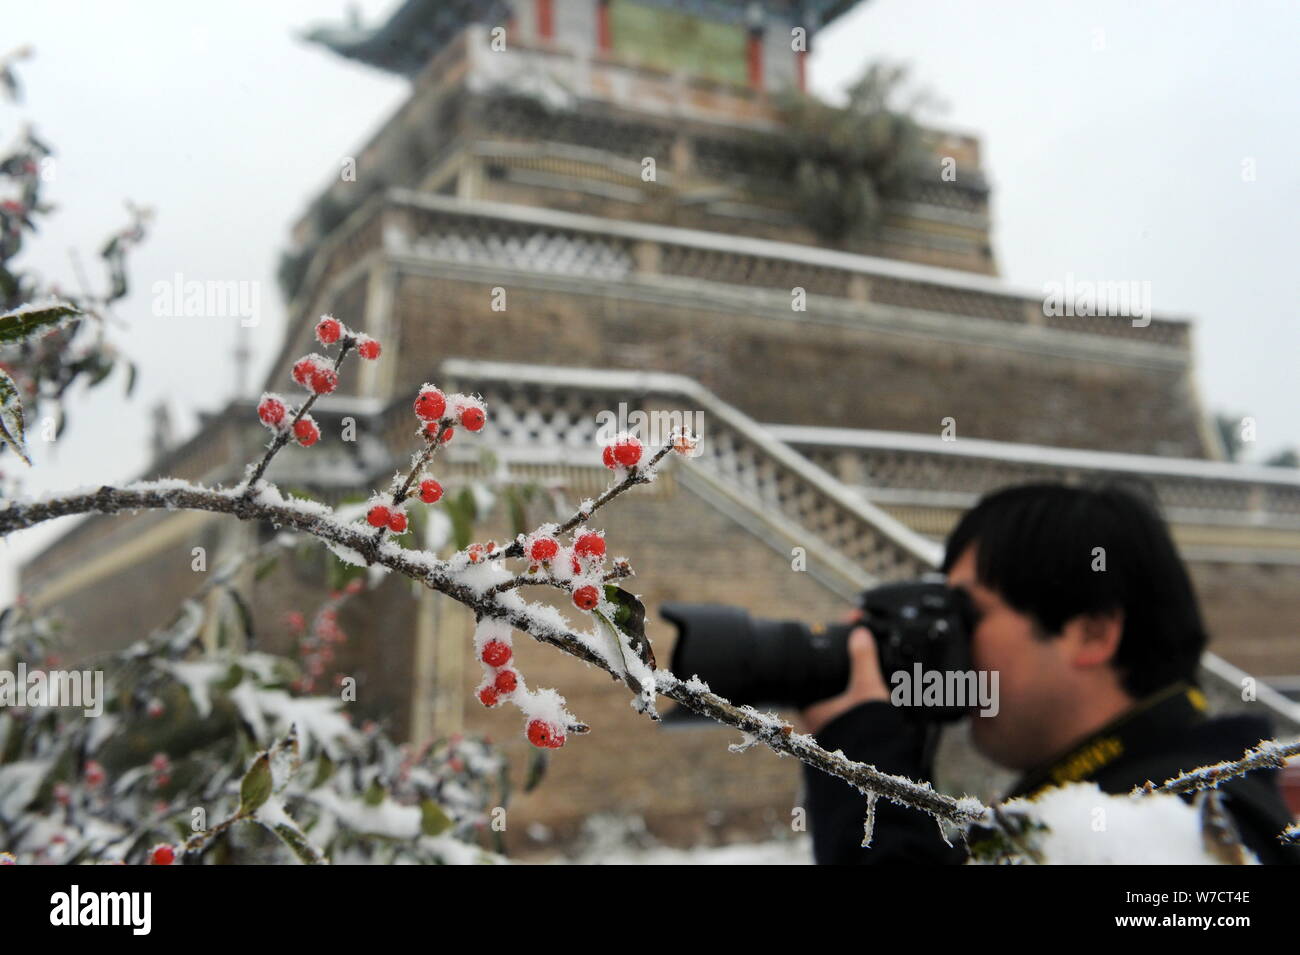 A tourist takes photos beside the Santai Pavilion on Gaolan Mountain after snowfall in Lanzhou city, northwest China's Gansu province, 9 October 2017. Stock Photo